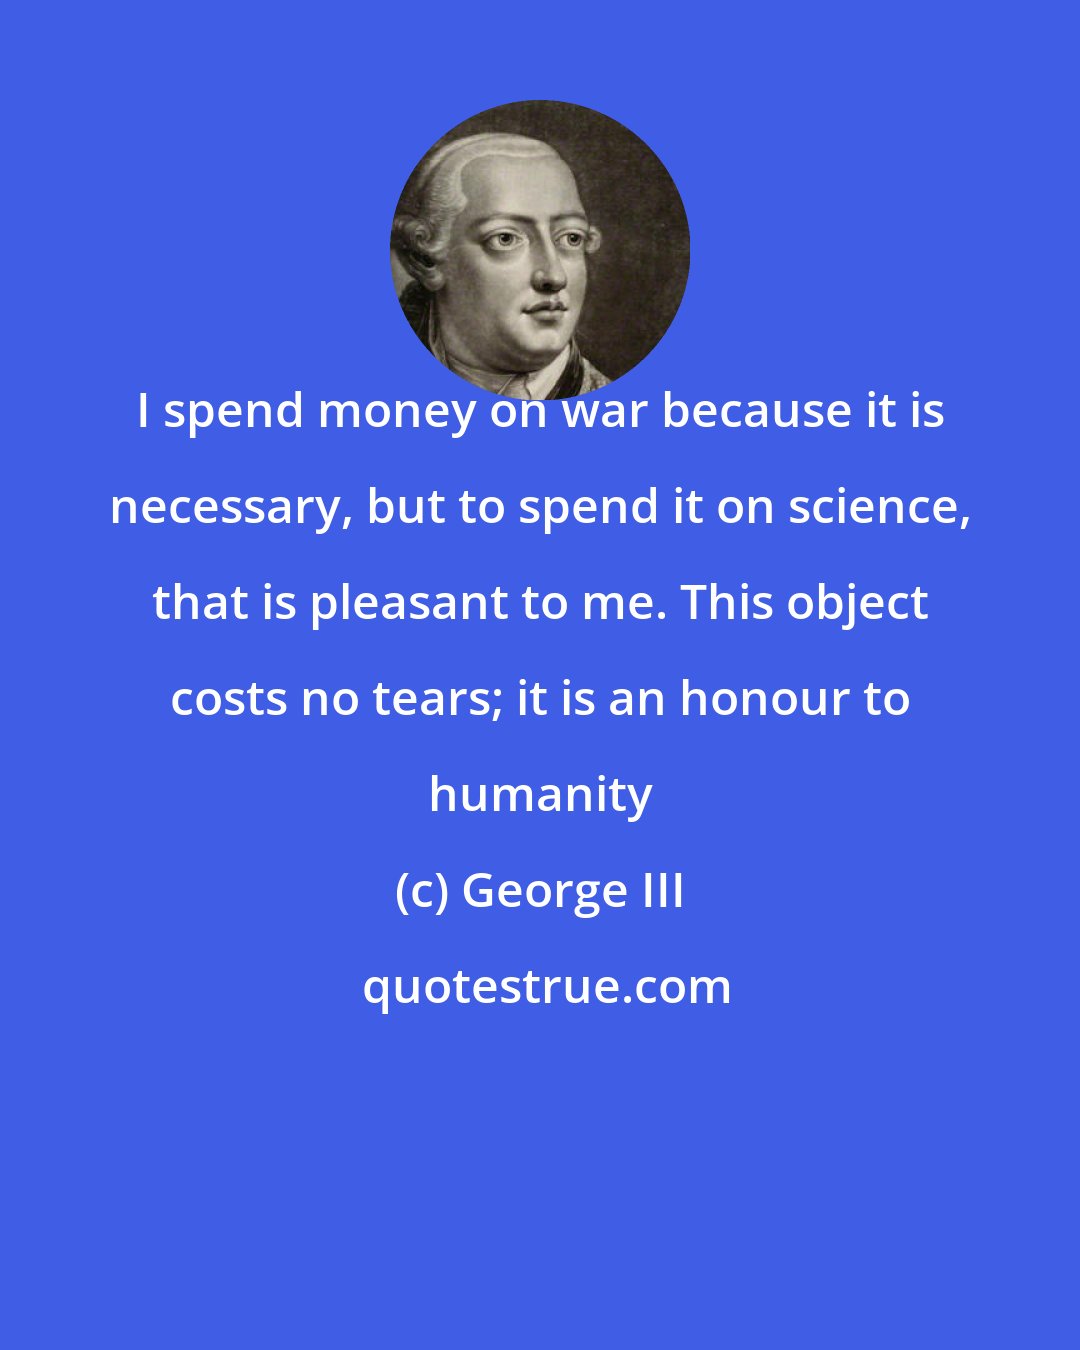 George III: I spend money on war because it is necessary, but to spend it on science, that is pleasant to me. This object costs no tears; it is an honour to humanity